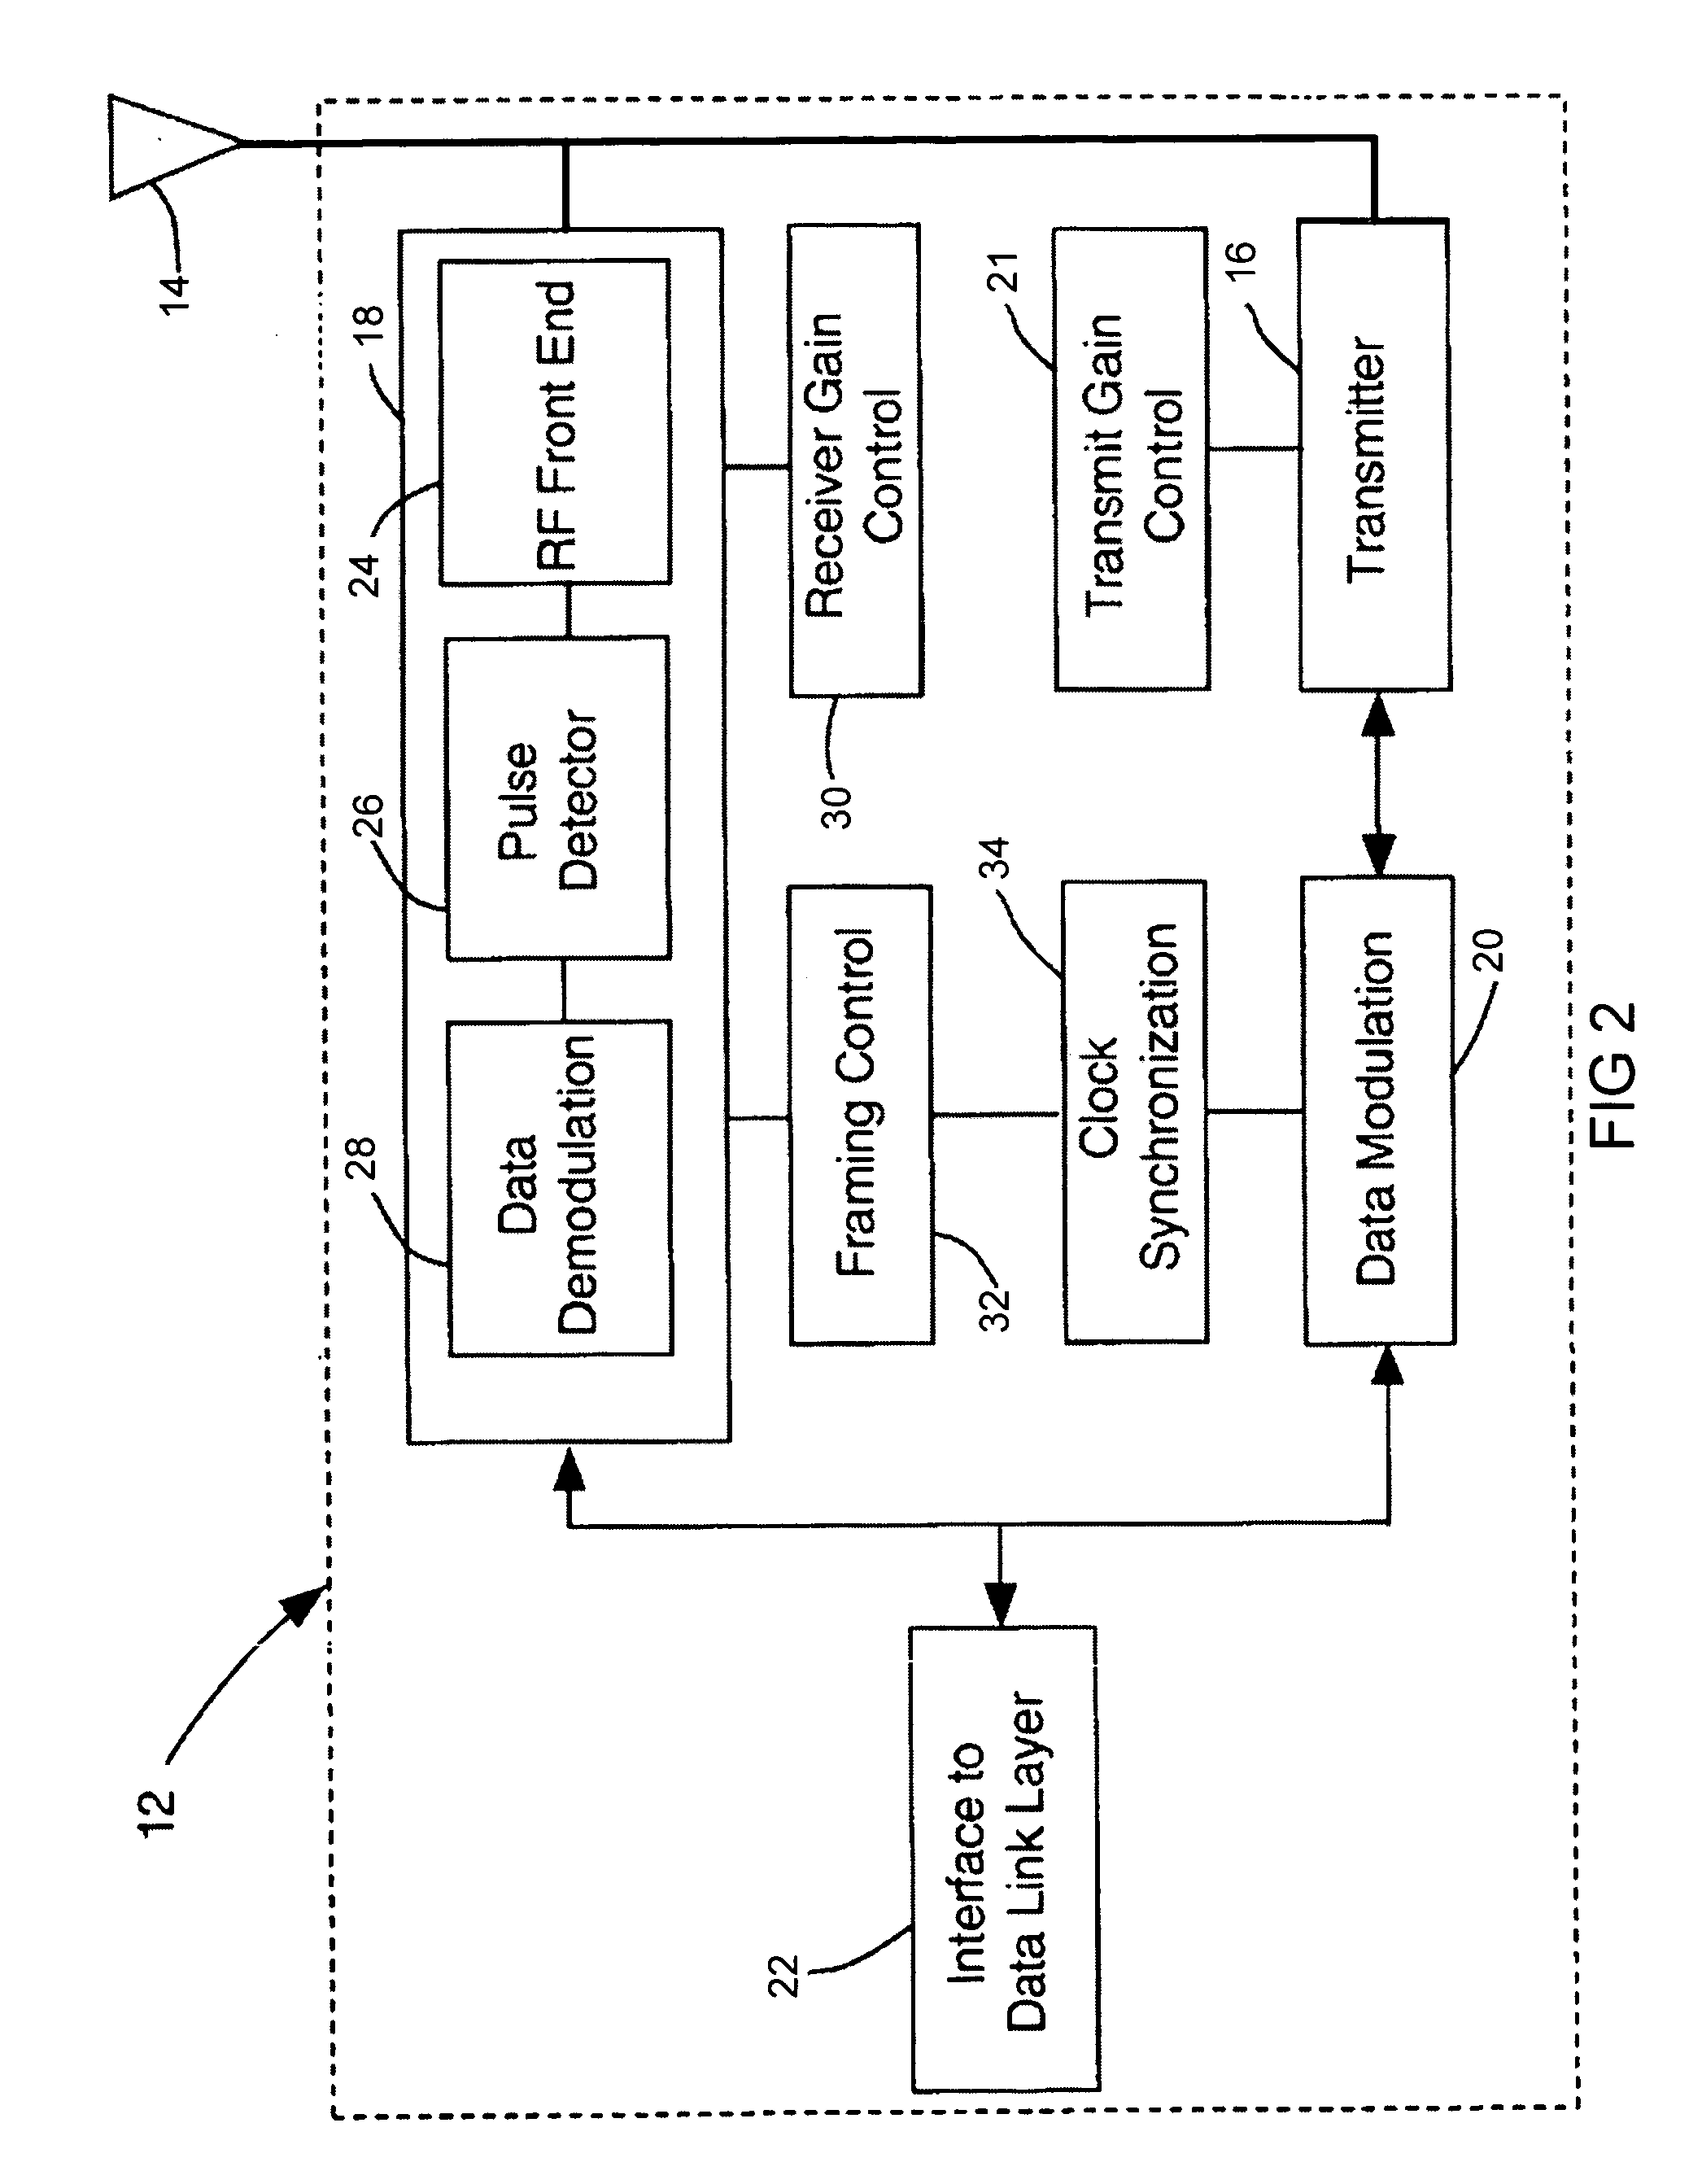 Ultra wide band communication systems and methods